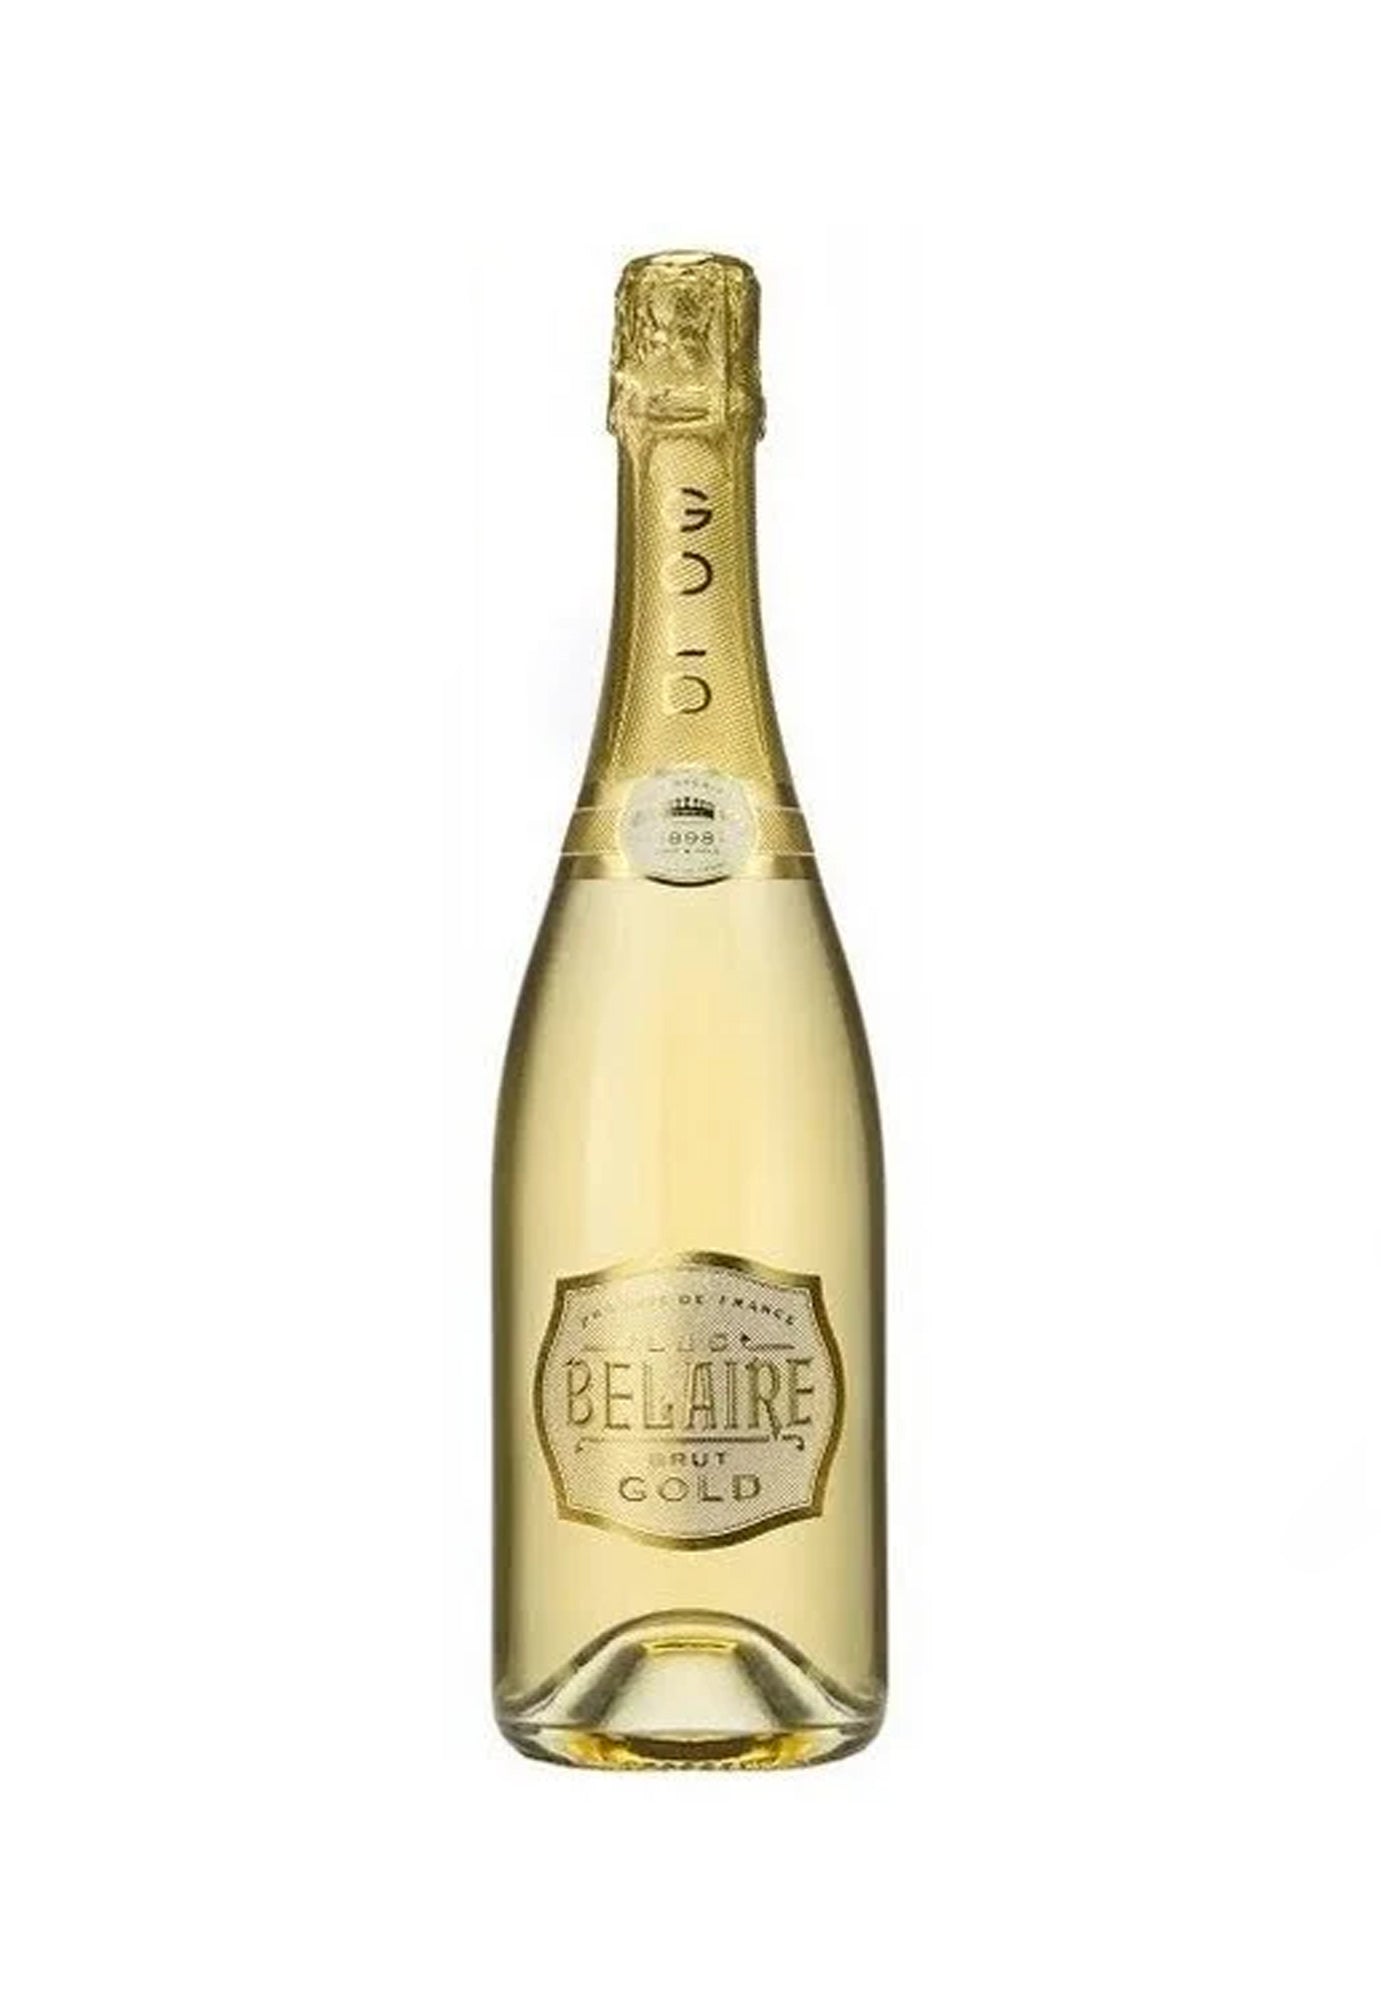 Luc Belaire Gold (NV)